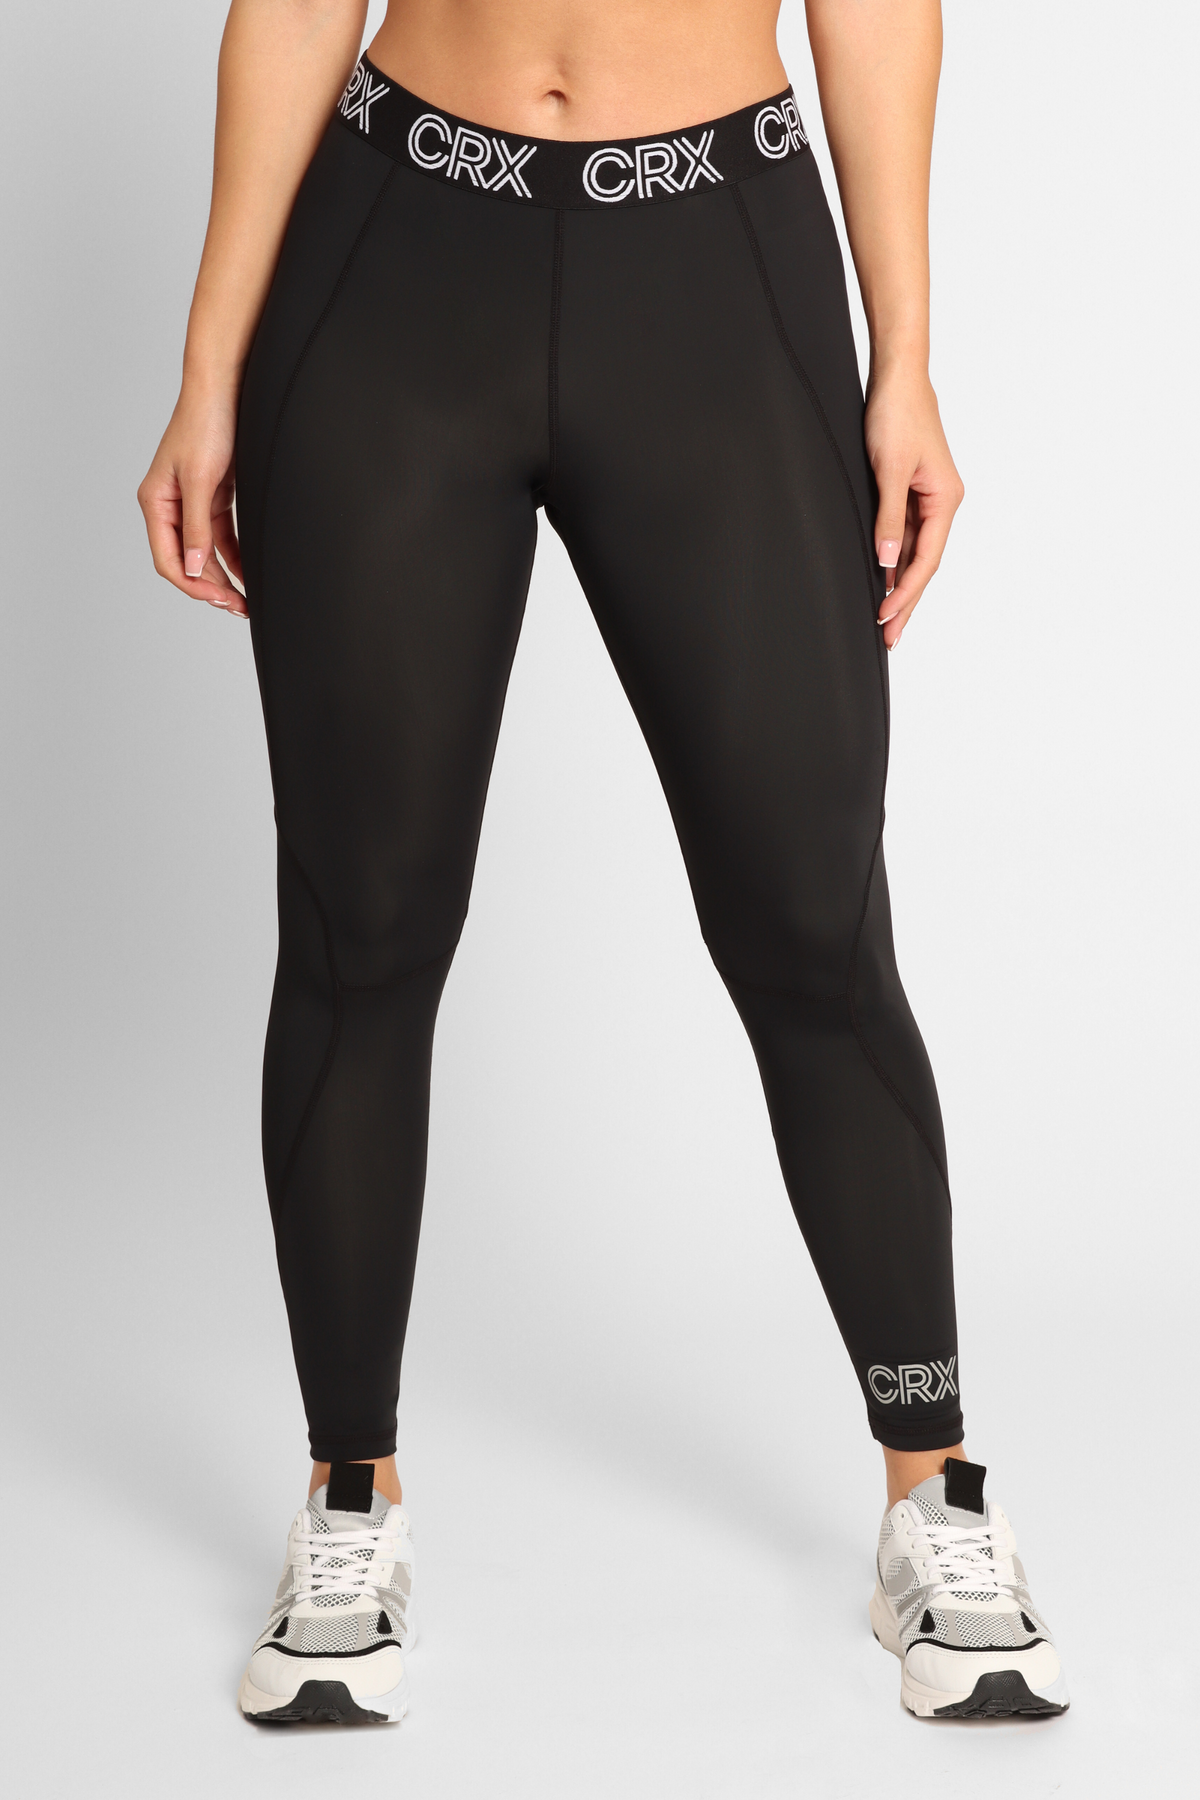 Graphic Compression Knit Leggings - Ready-to-Wear 1AC1O4